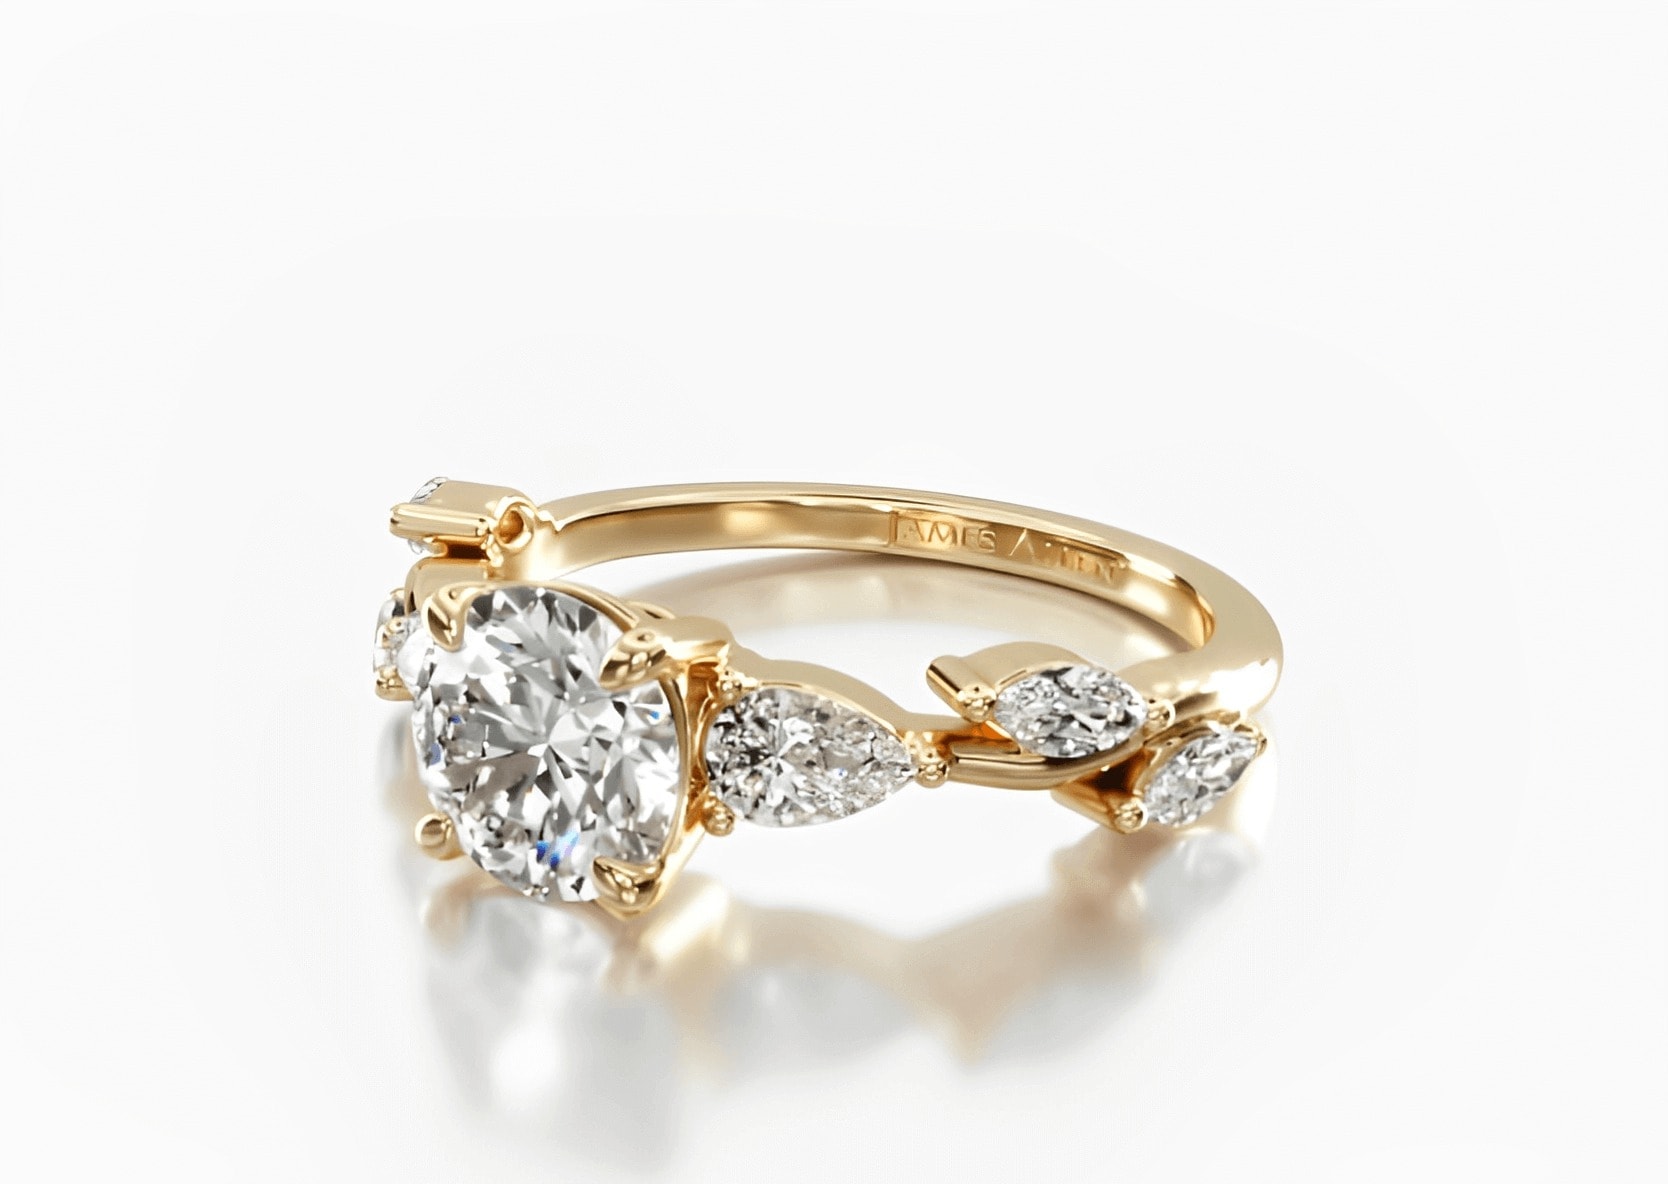 14k yellow gold and diamond engagement ring